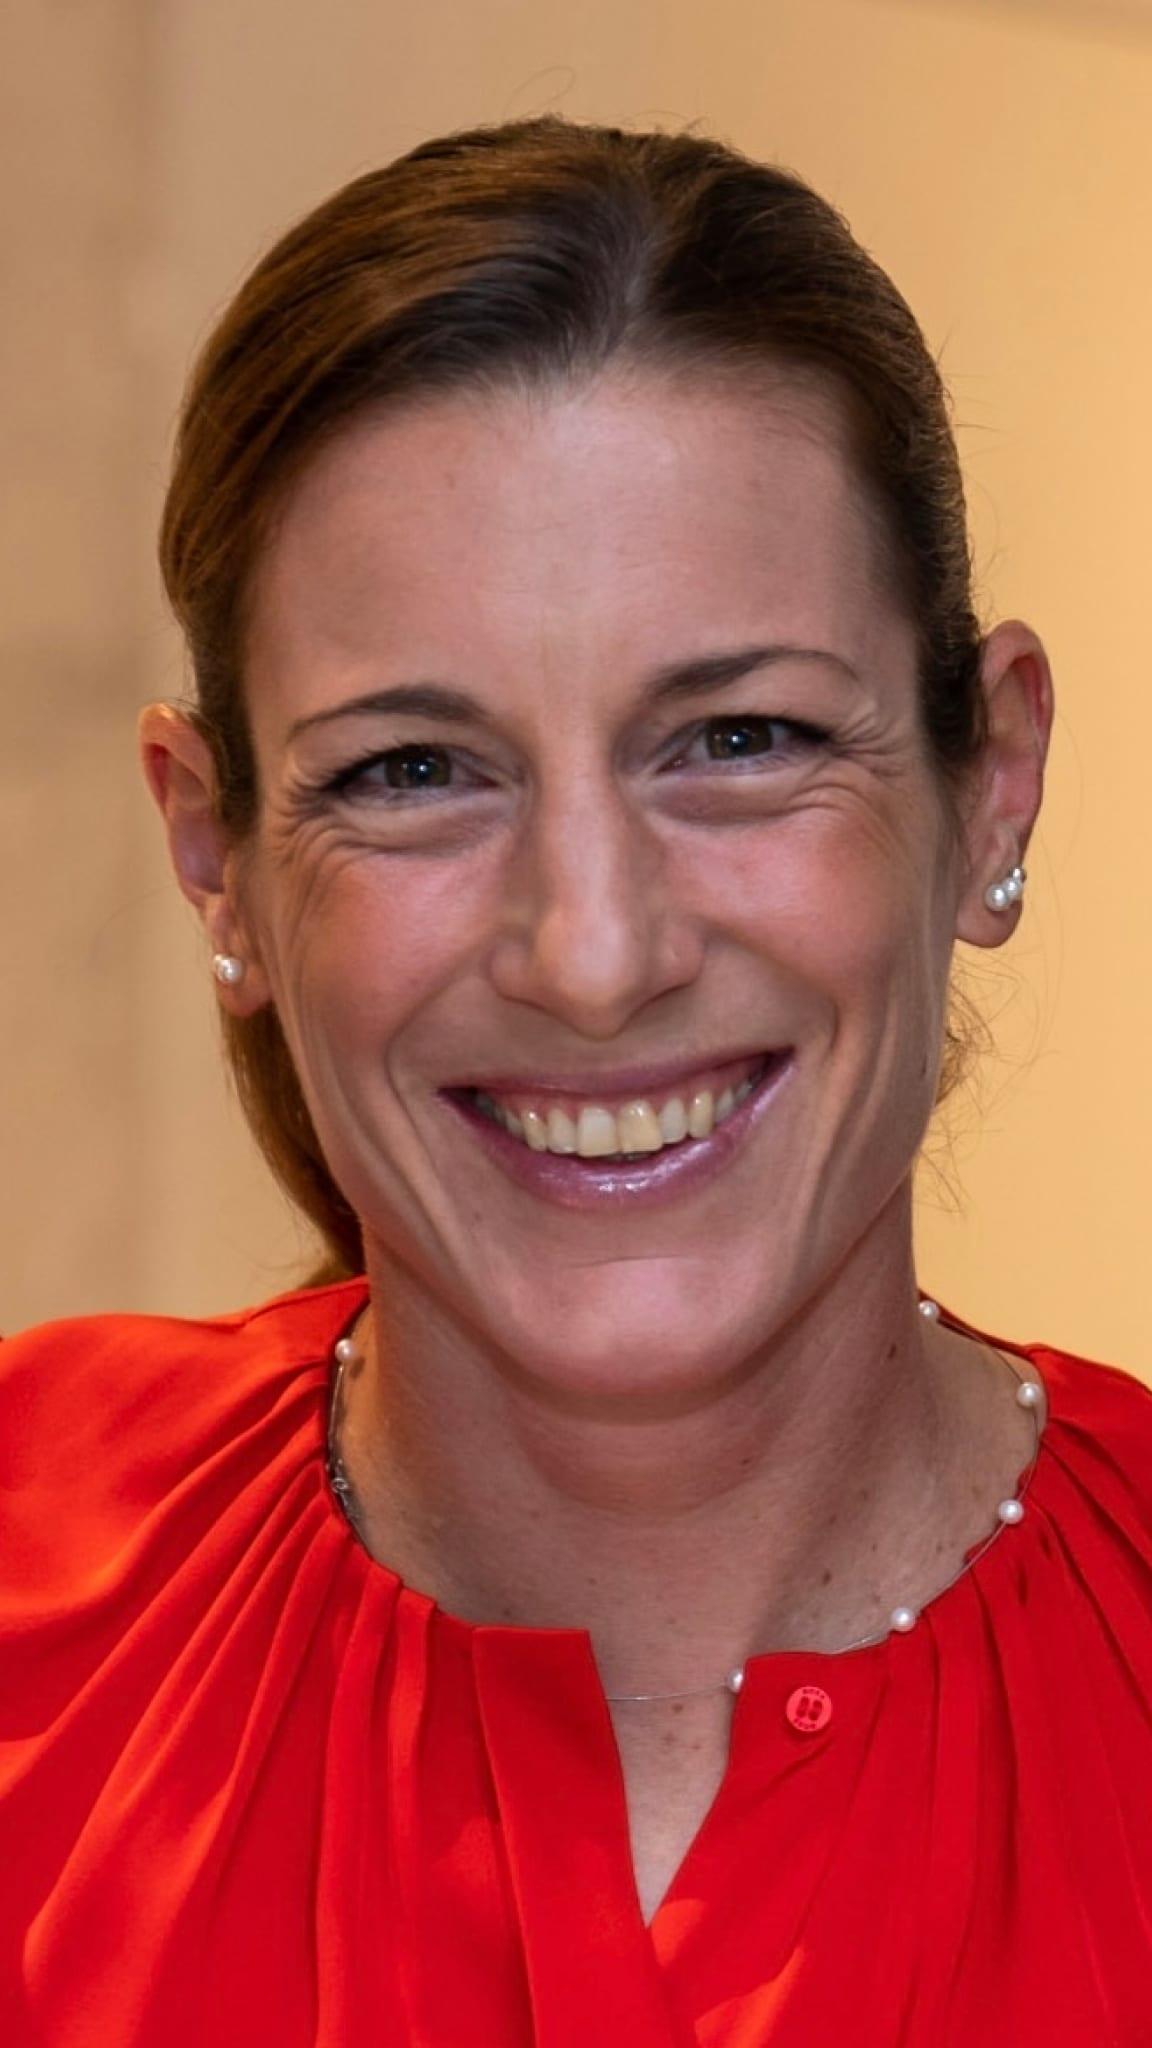 A portrait of a woman smiling at the camera.